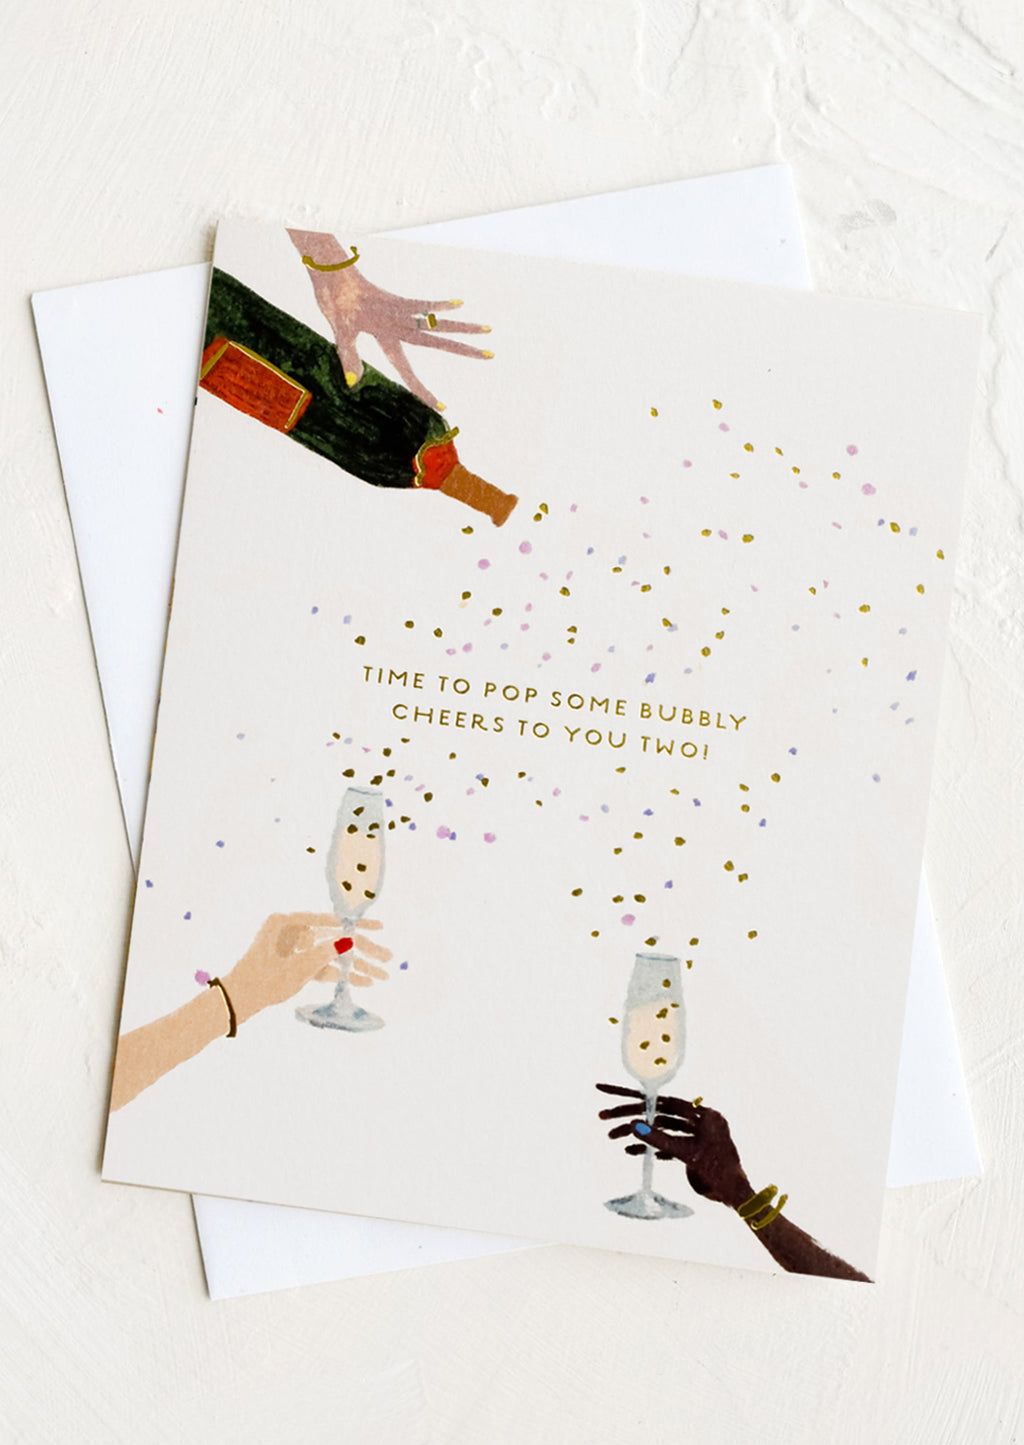 1: A greeting card with images of hands holding champagne glasses.